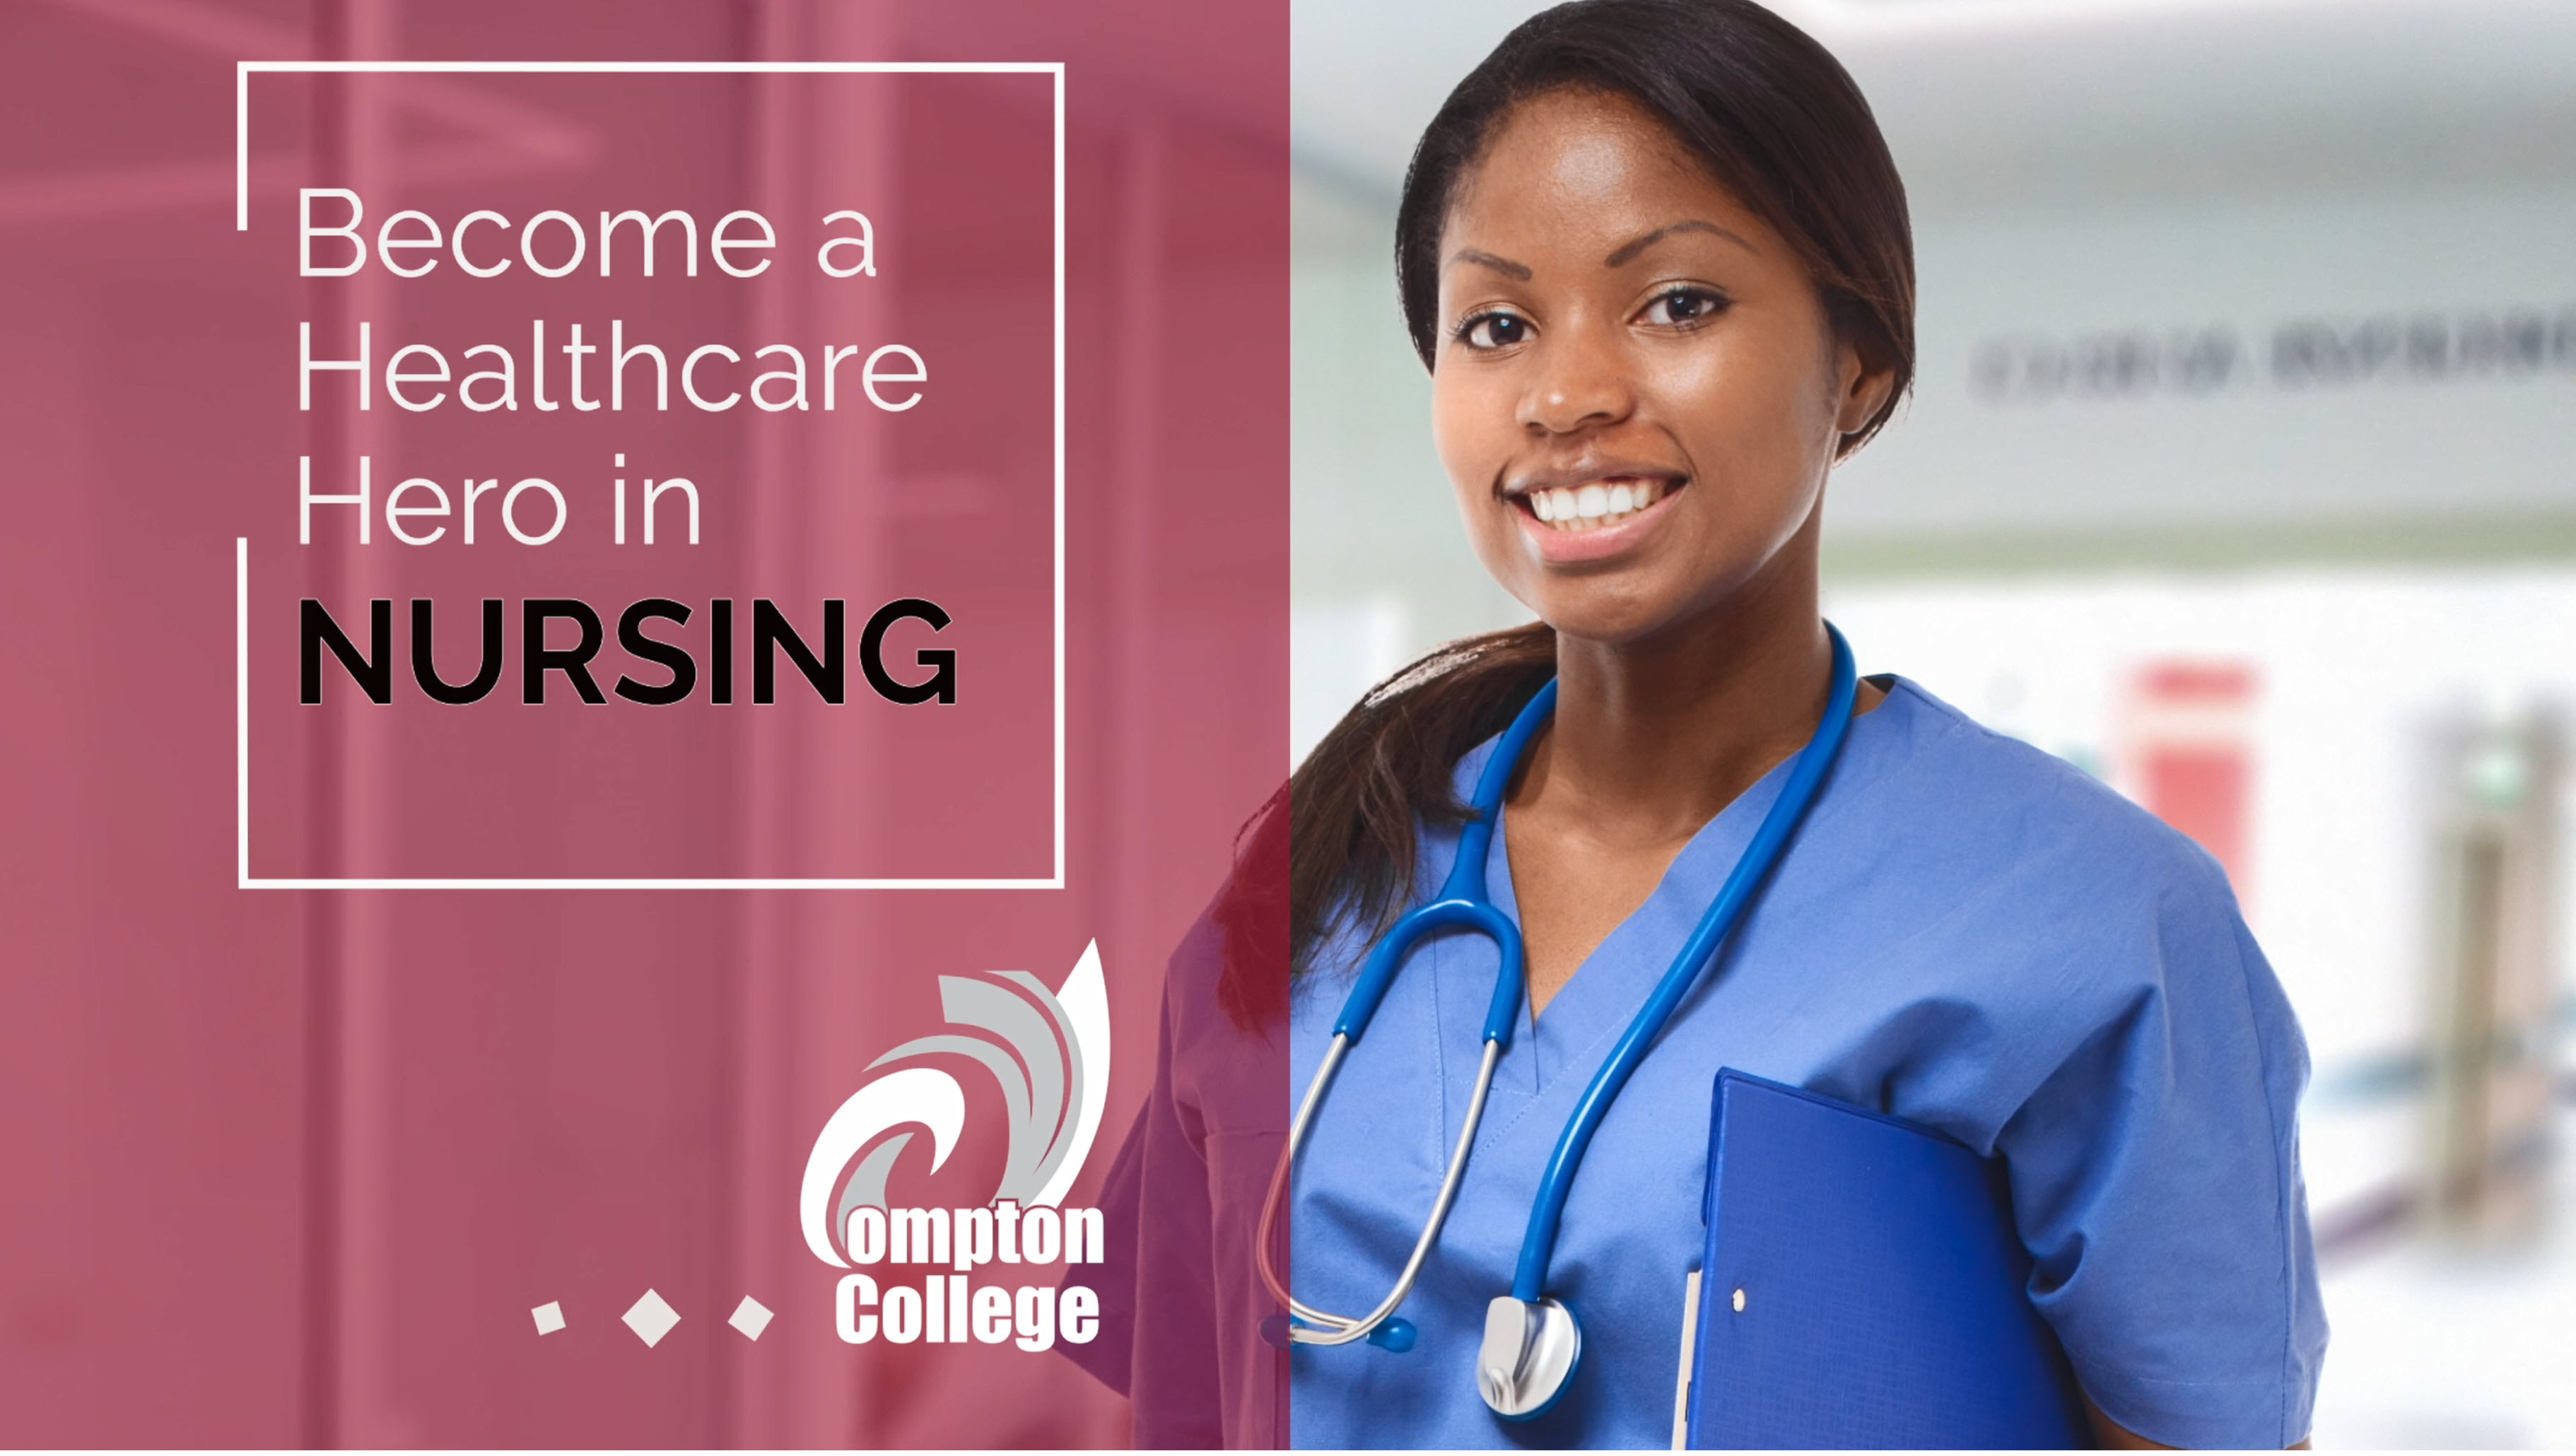 What Education Is Needed to Become a Registered Nurse?